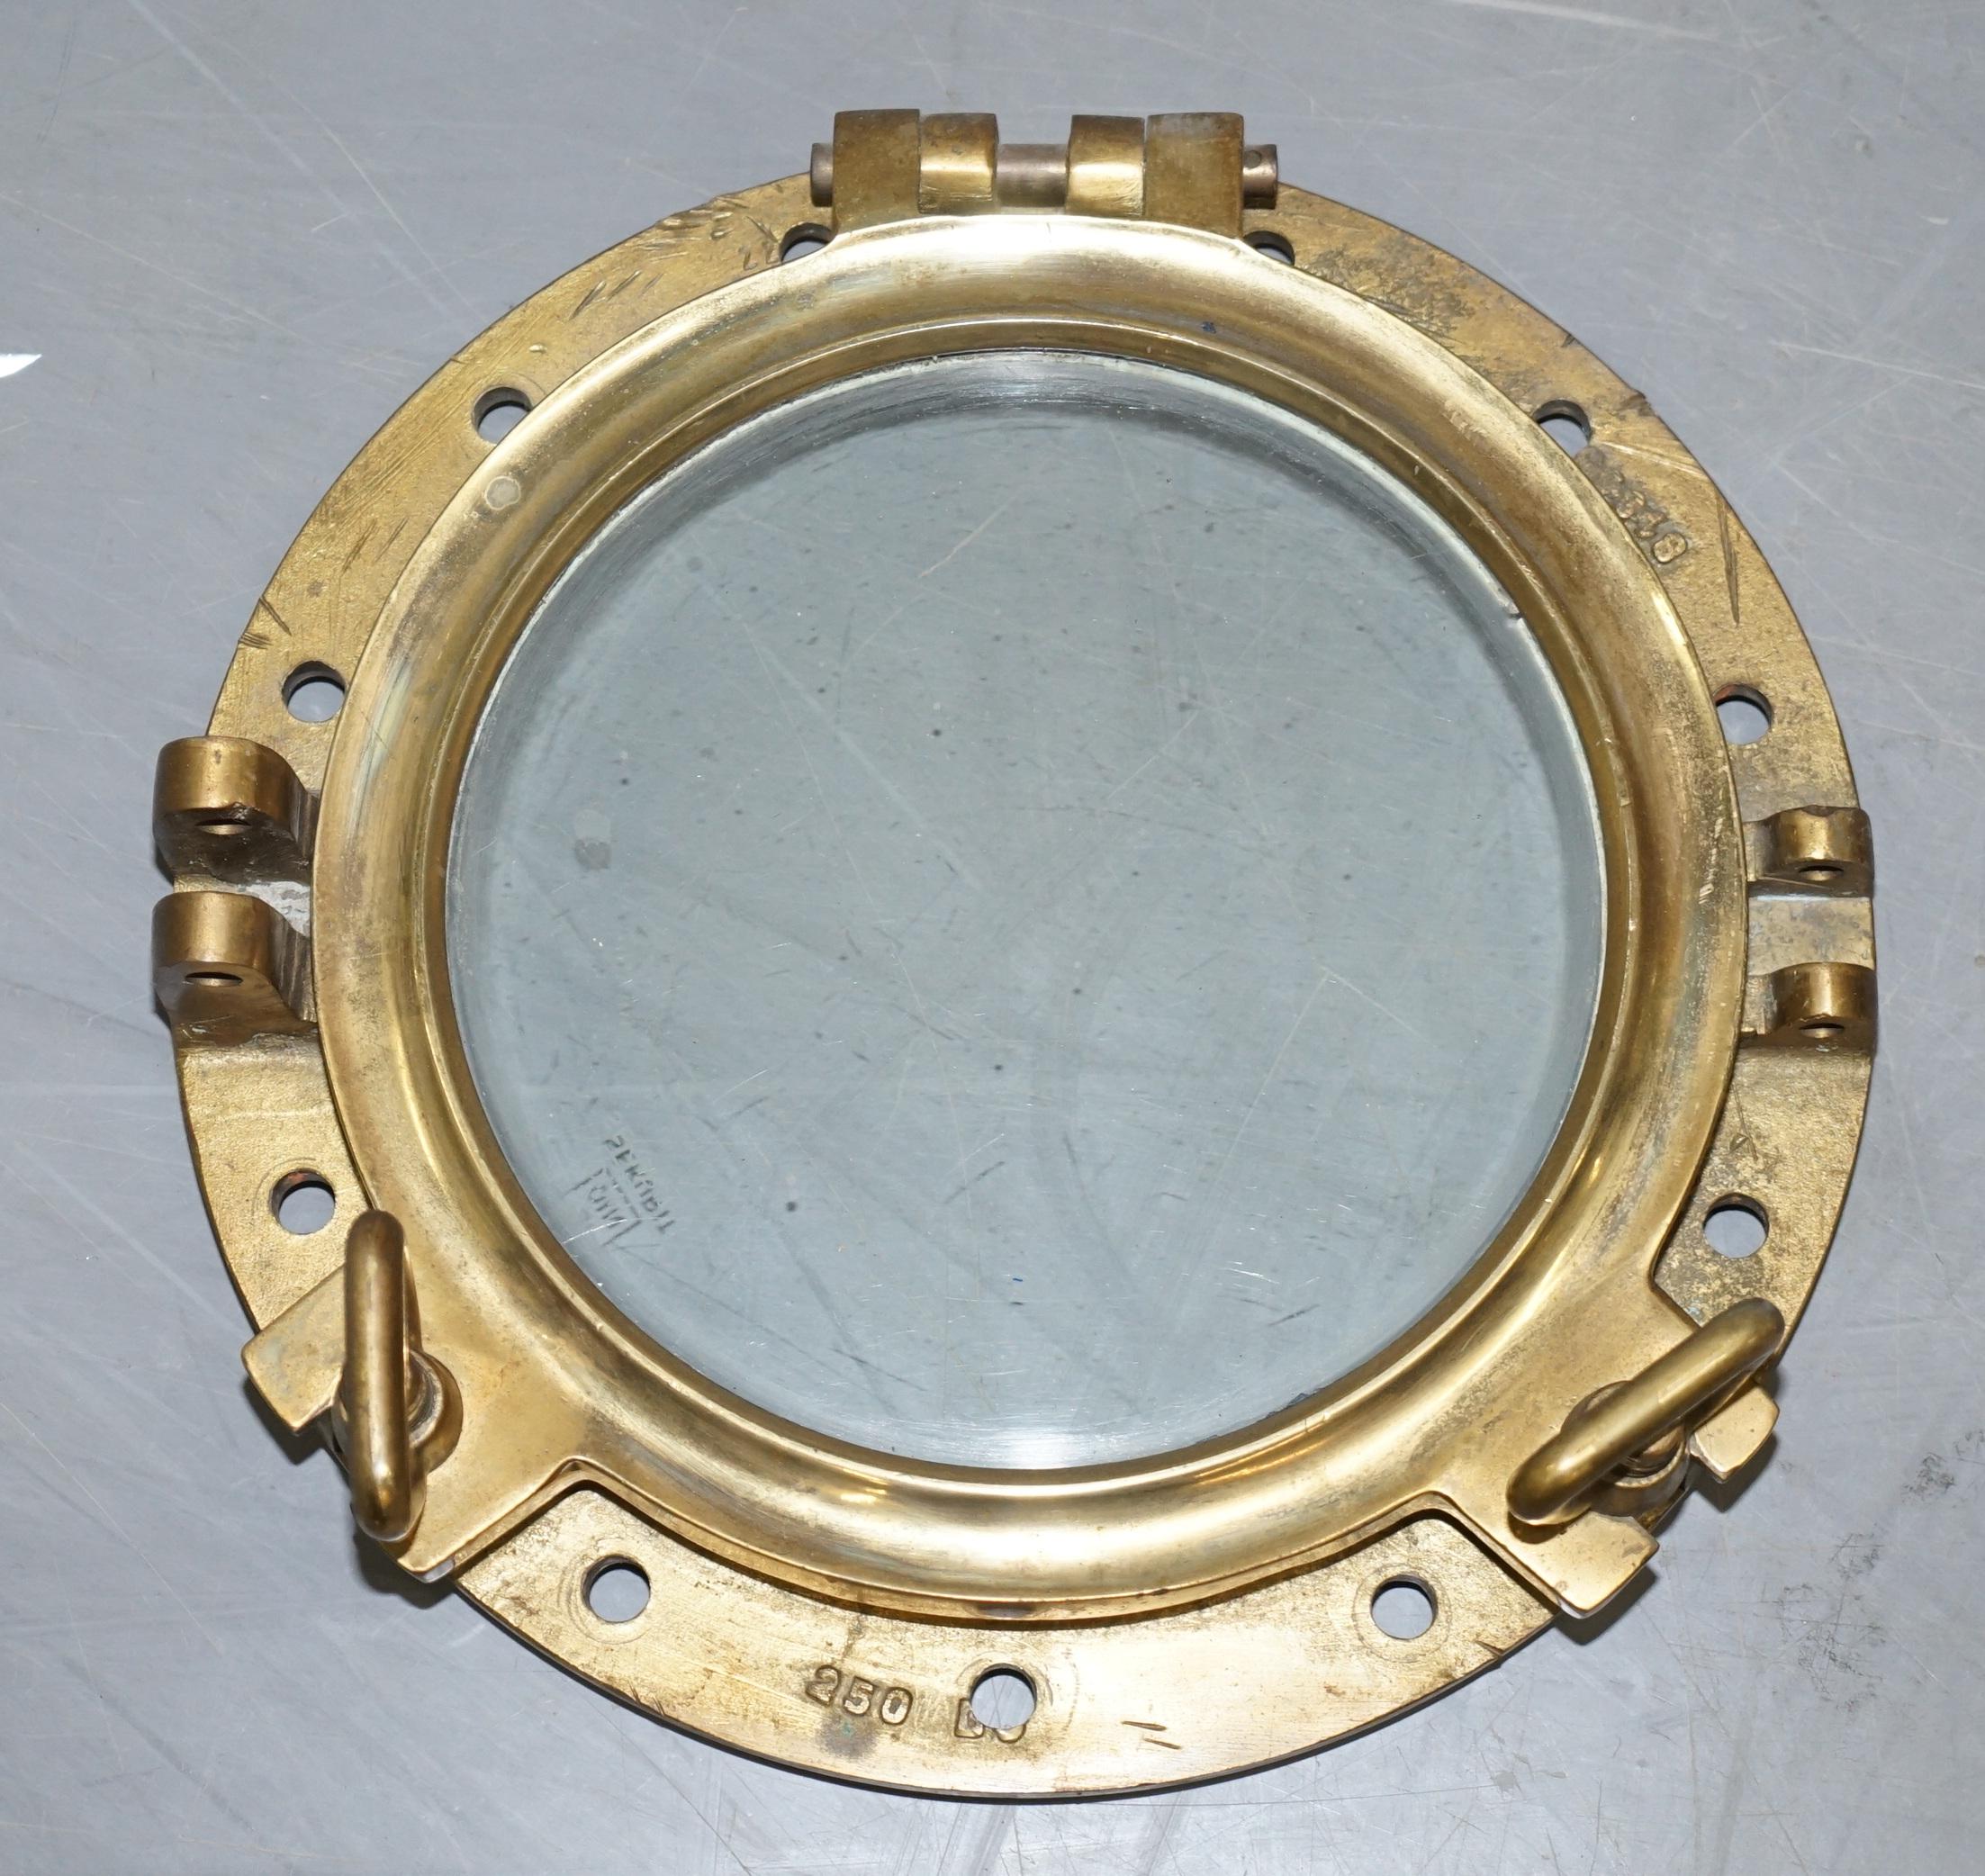 We are delighted to offer for sale this suite of three very rare and highly collectable solid brass Belgium Military Navy Porthole windows

These were reclaimed from an Ex Military ship in Belgium, I purchased them from an old antiques dealer in